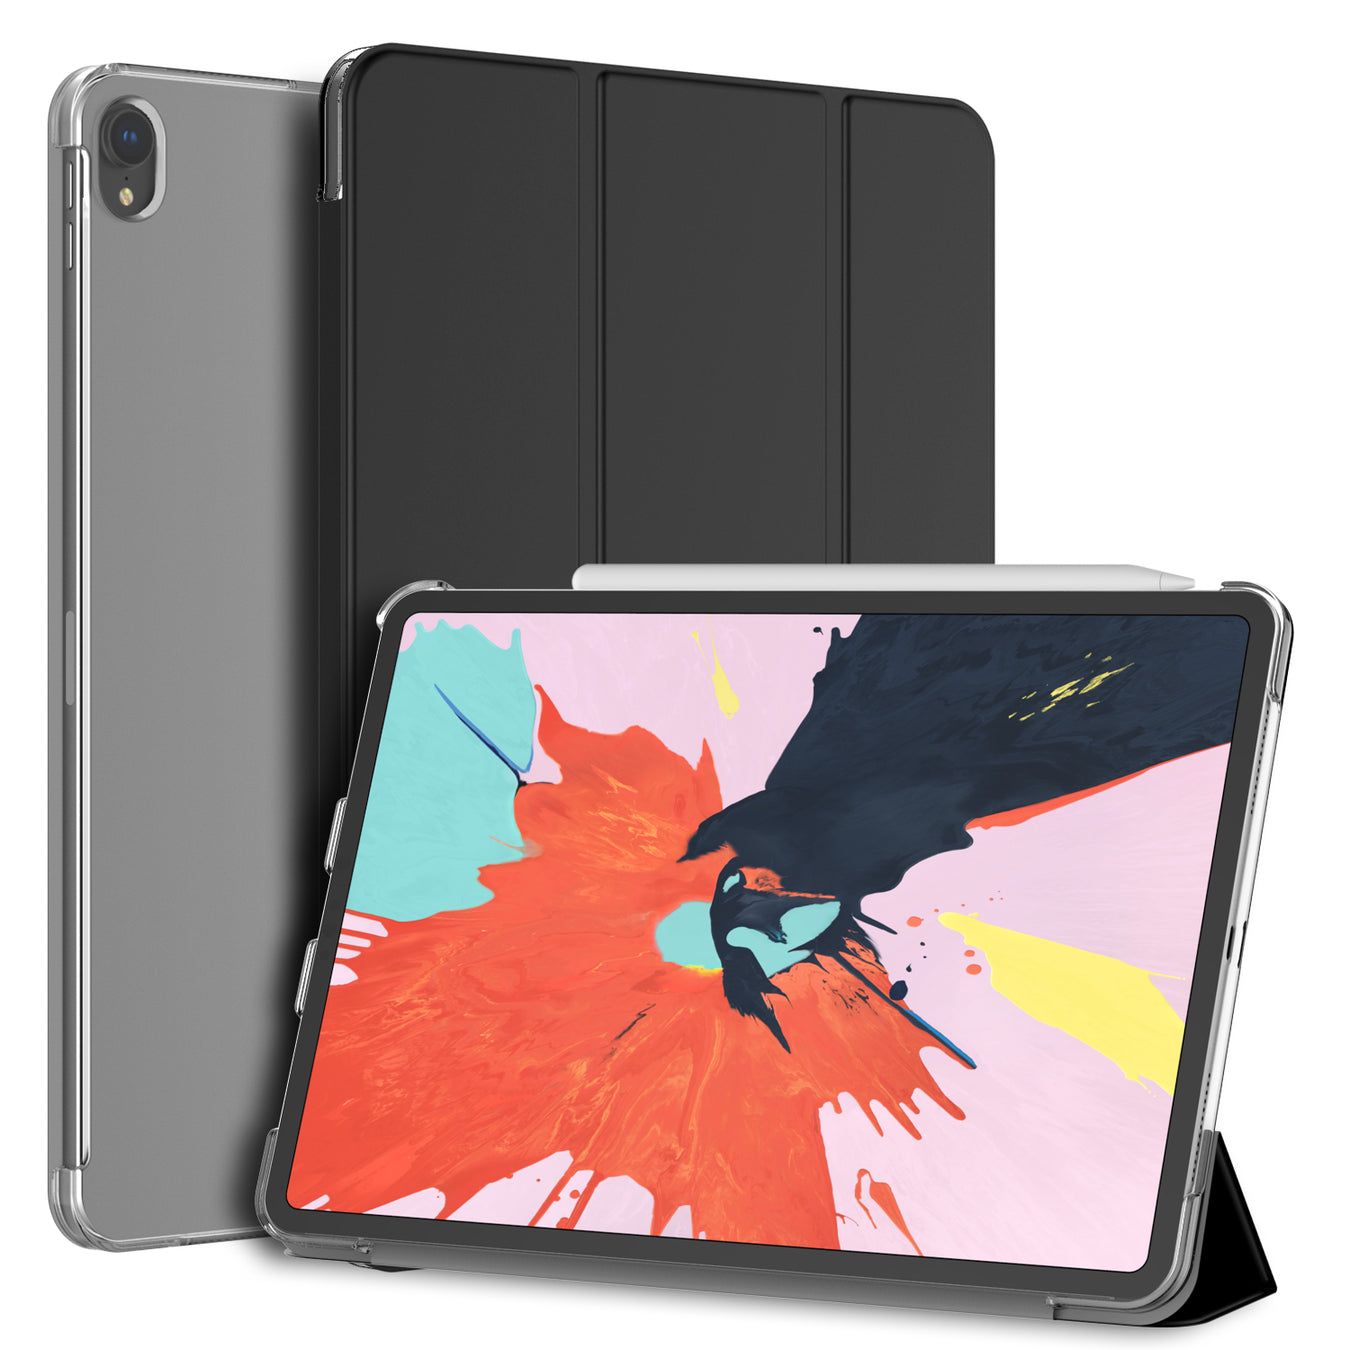 Computers/Tablets & Networking:iPad/Tablet/eBook Accessories:Cases, Covers, Keyboard Folios